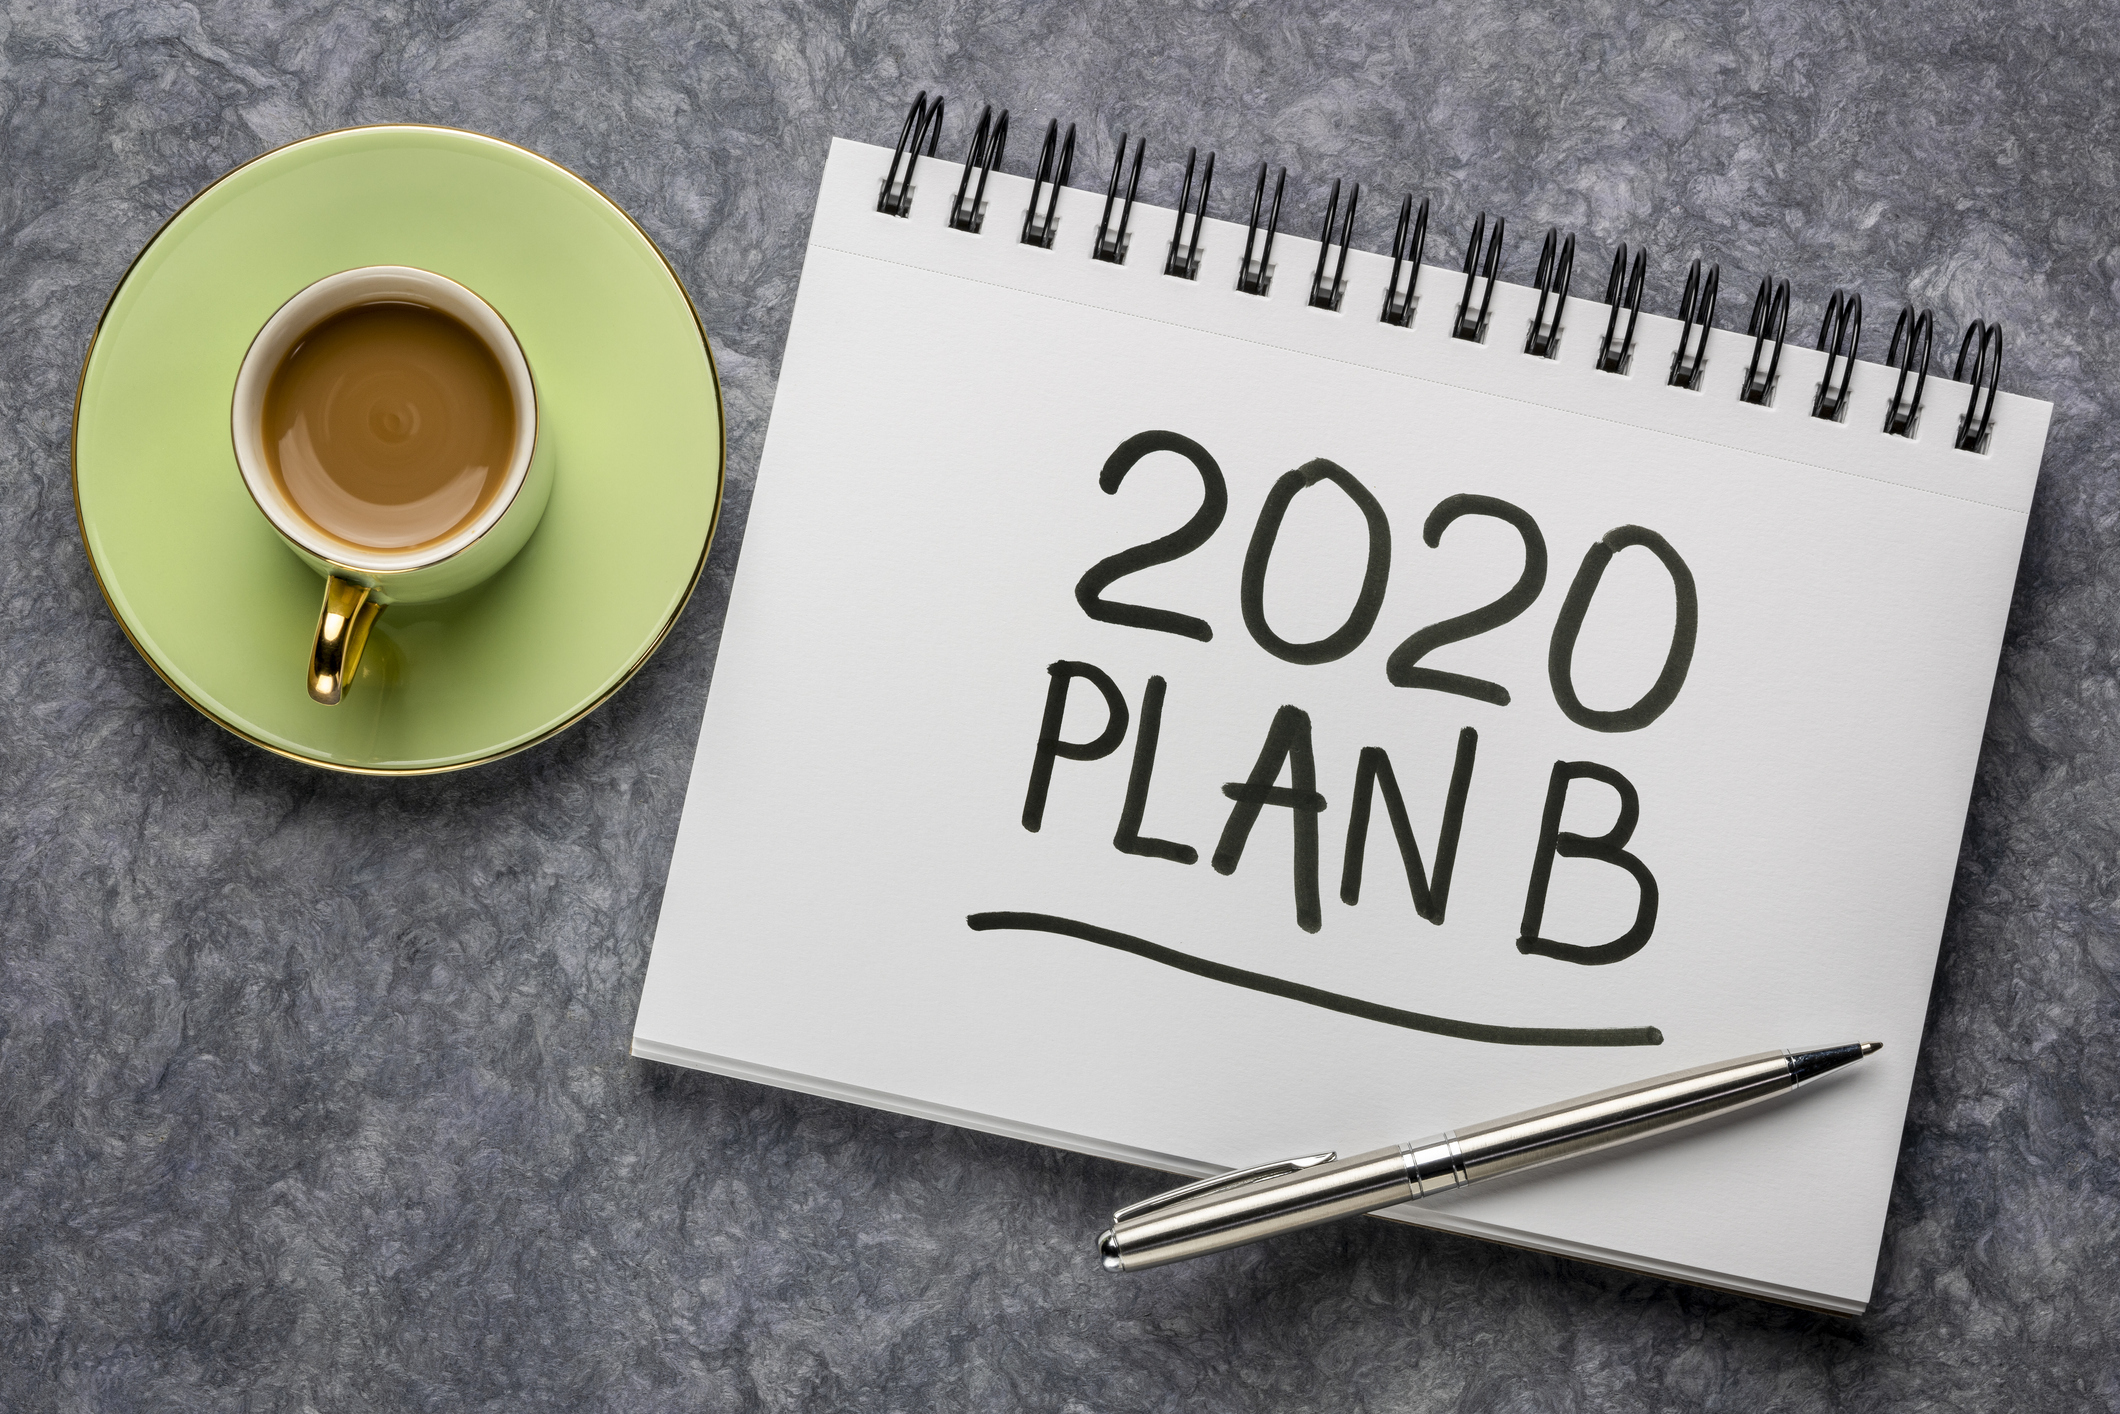 2020 plan B - change of business and personal plans for 2020 coronavirus pandemic and market recession, handwriting in a sketchbook